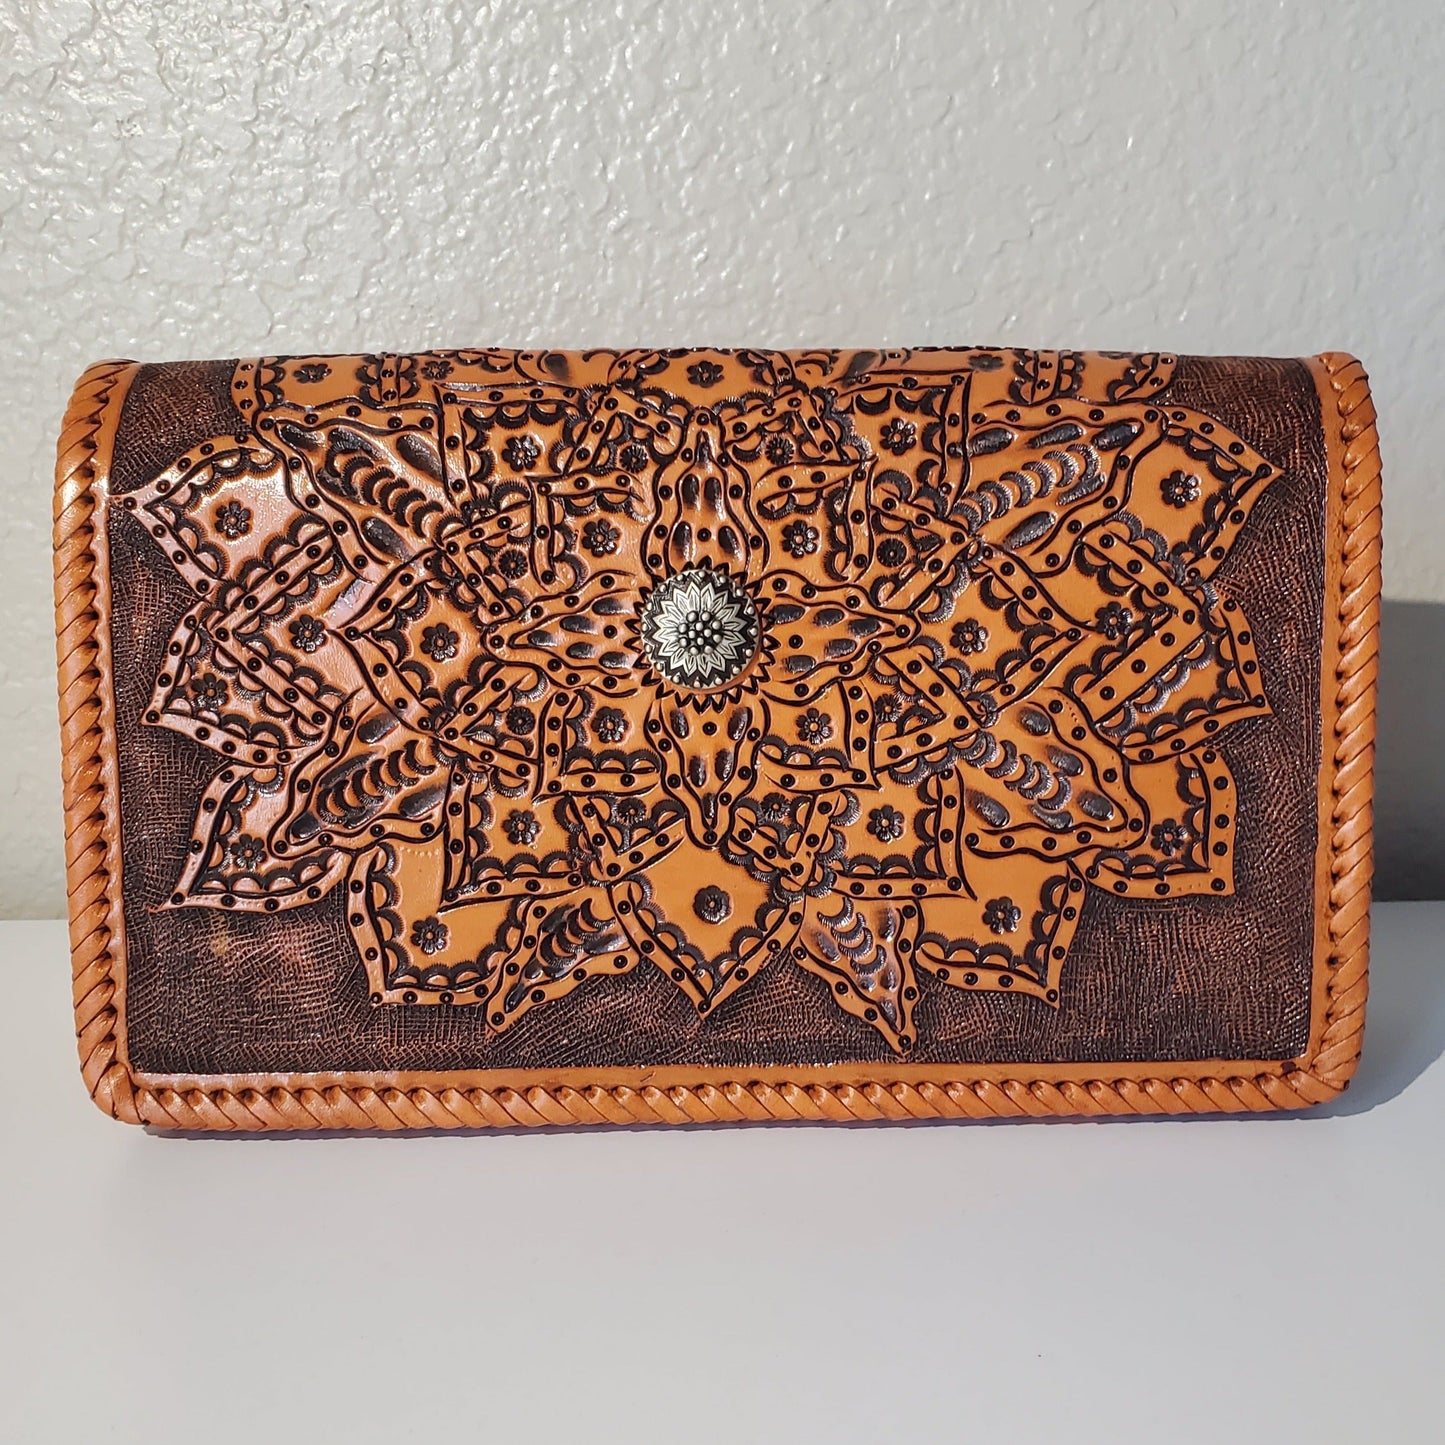 Hand Made Leather Crossbody Bag "CECELIA" by MIOHERMOSA Honey Cecilia Mayan Middle